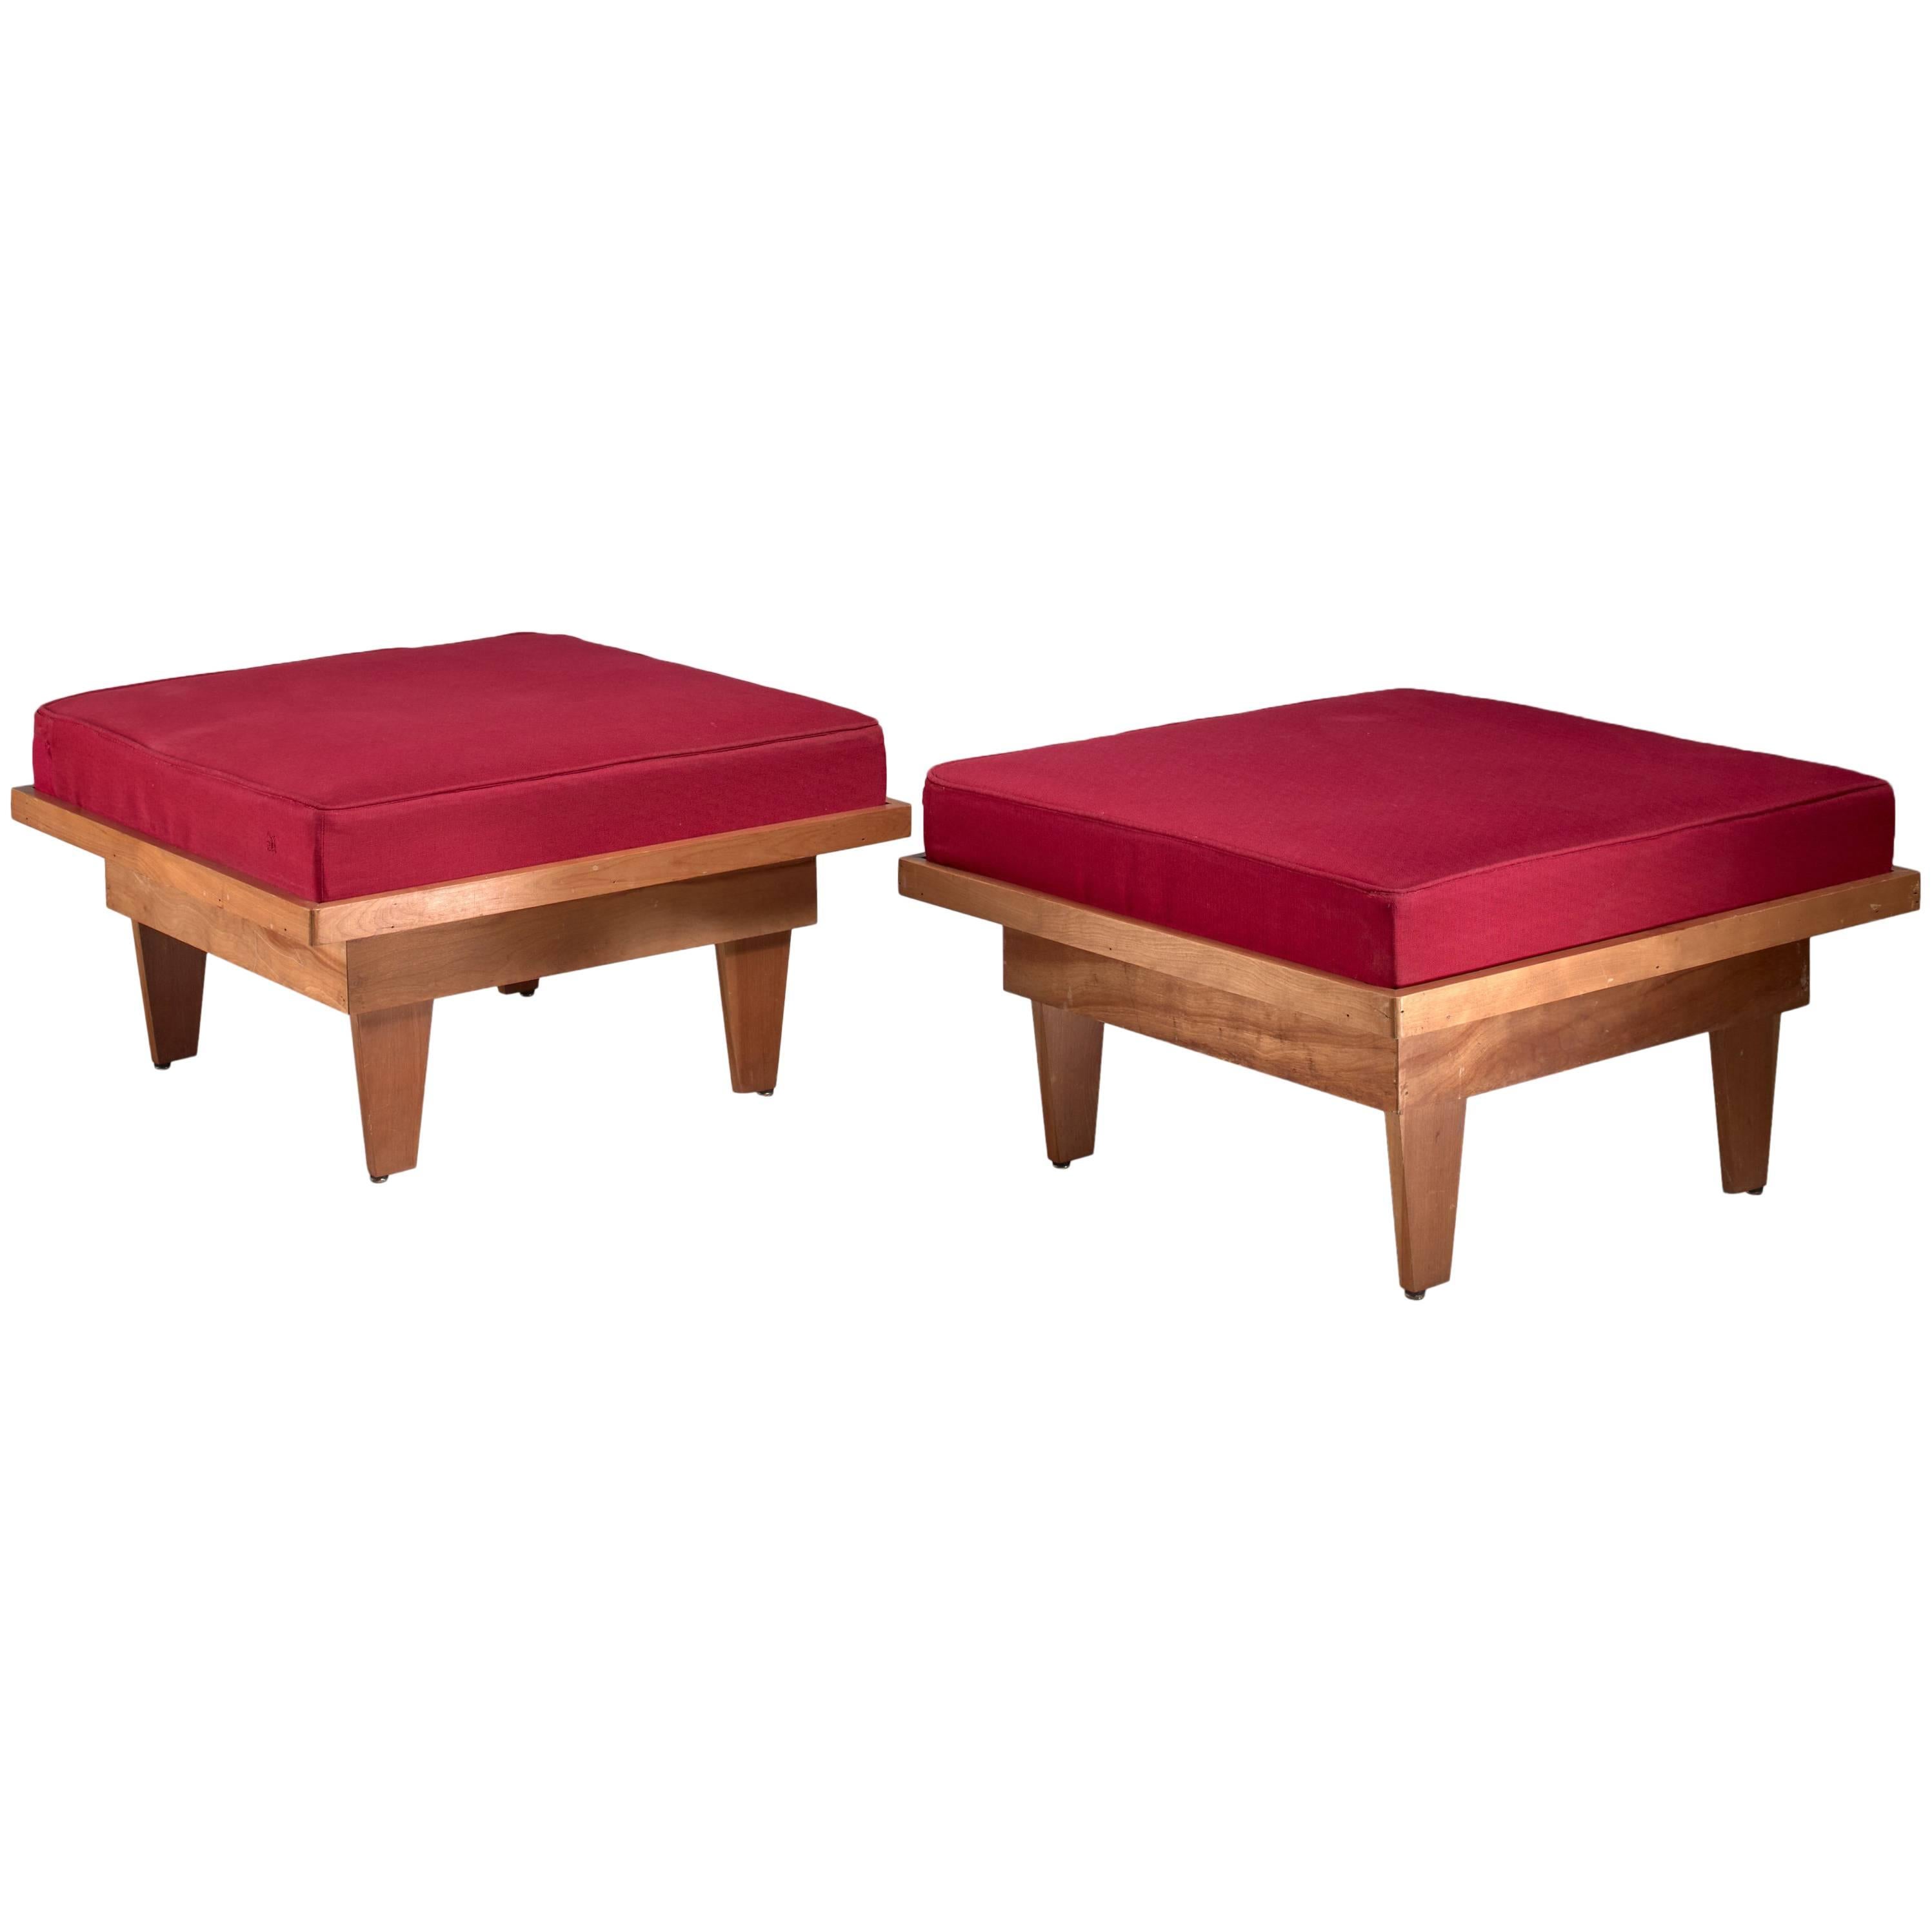 Pair of Plywood Studio Craft Ottomans, USA, 1940s For Sale